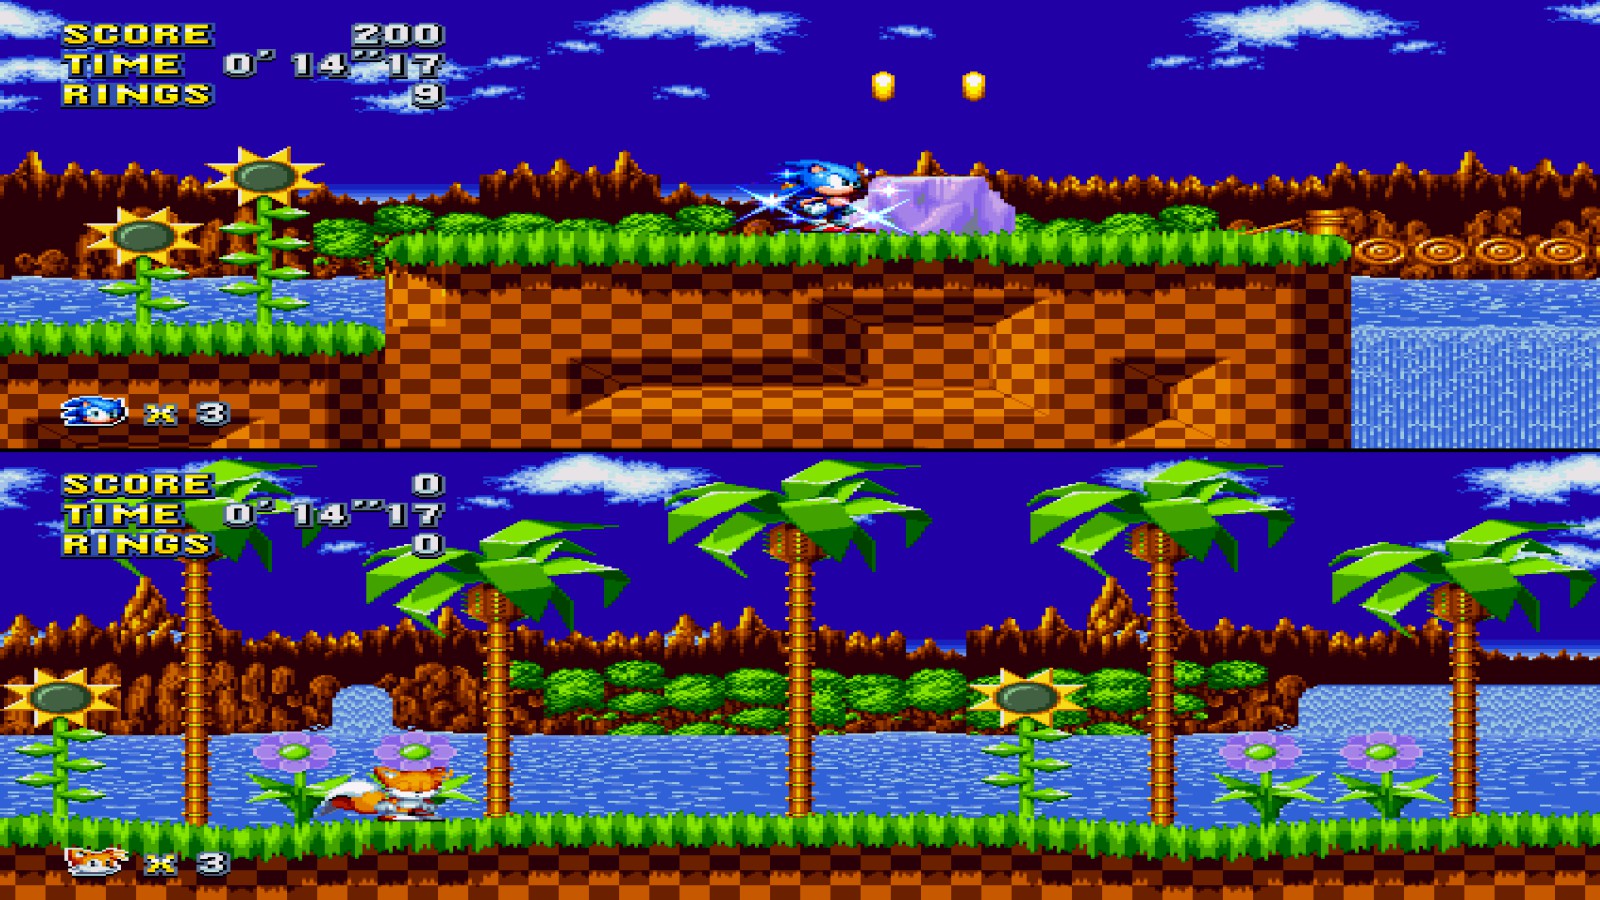 Sonic Mania Coop  Is there multiplayer? - GameRevolution